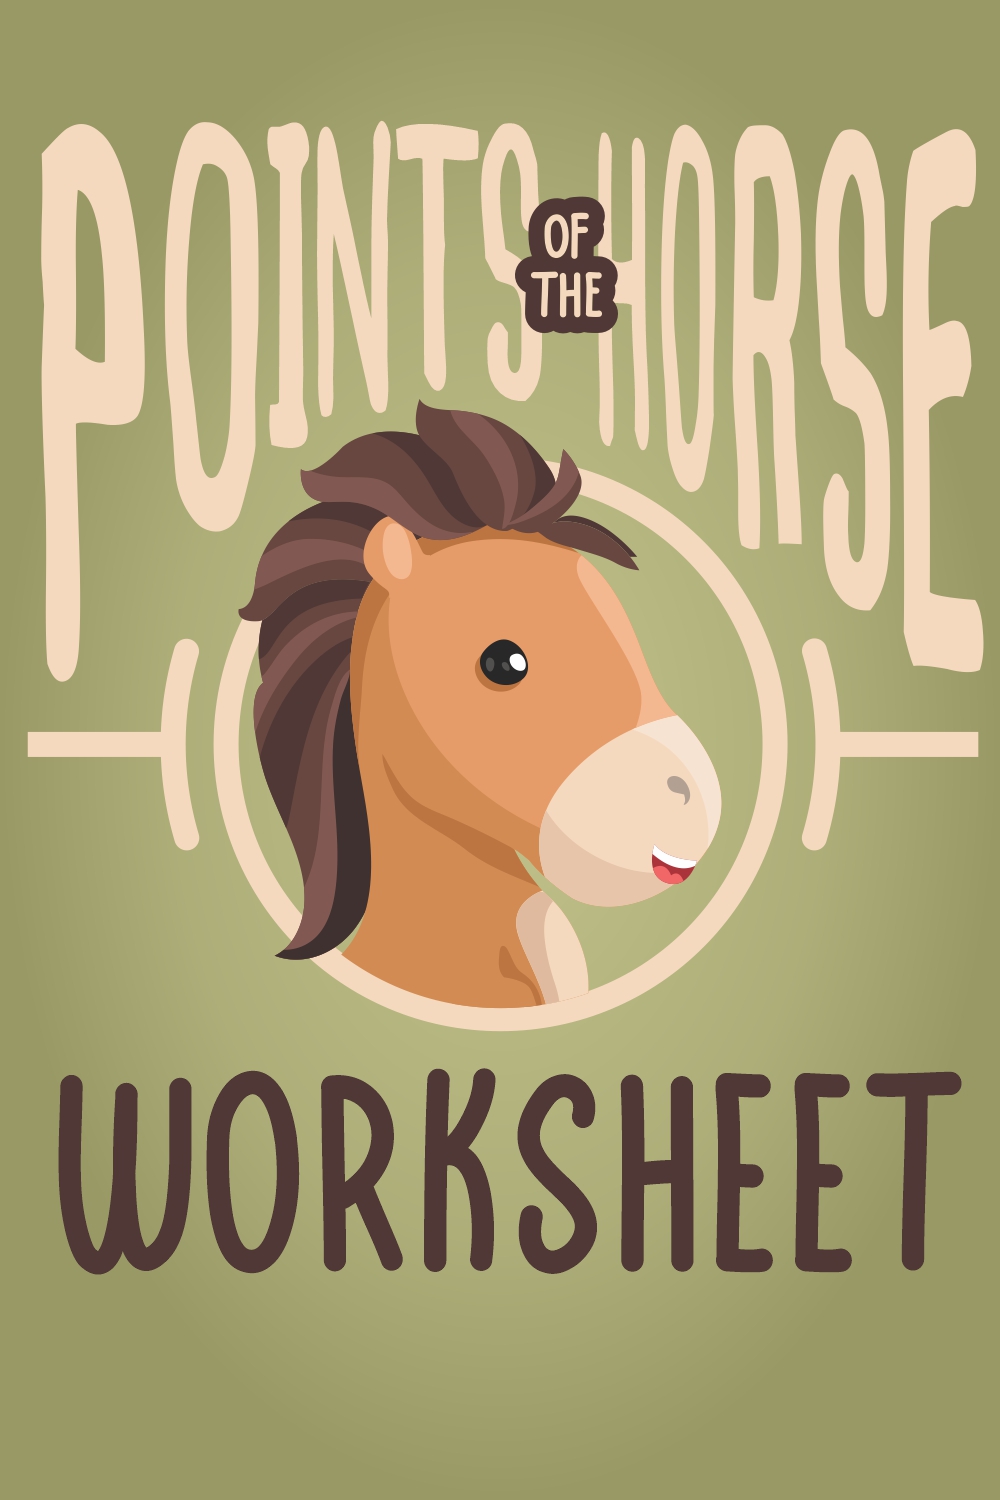 8 Images of Points Of The Horse Worksheet